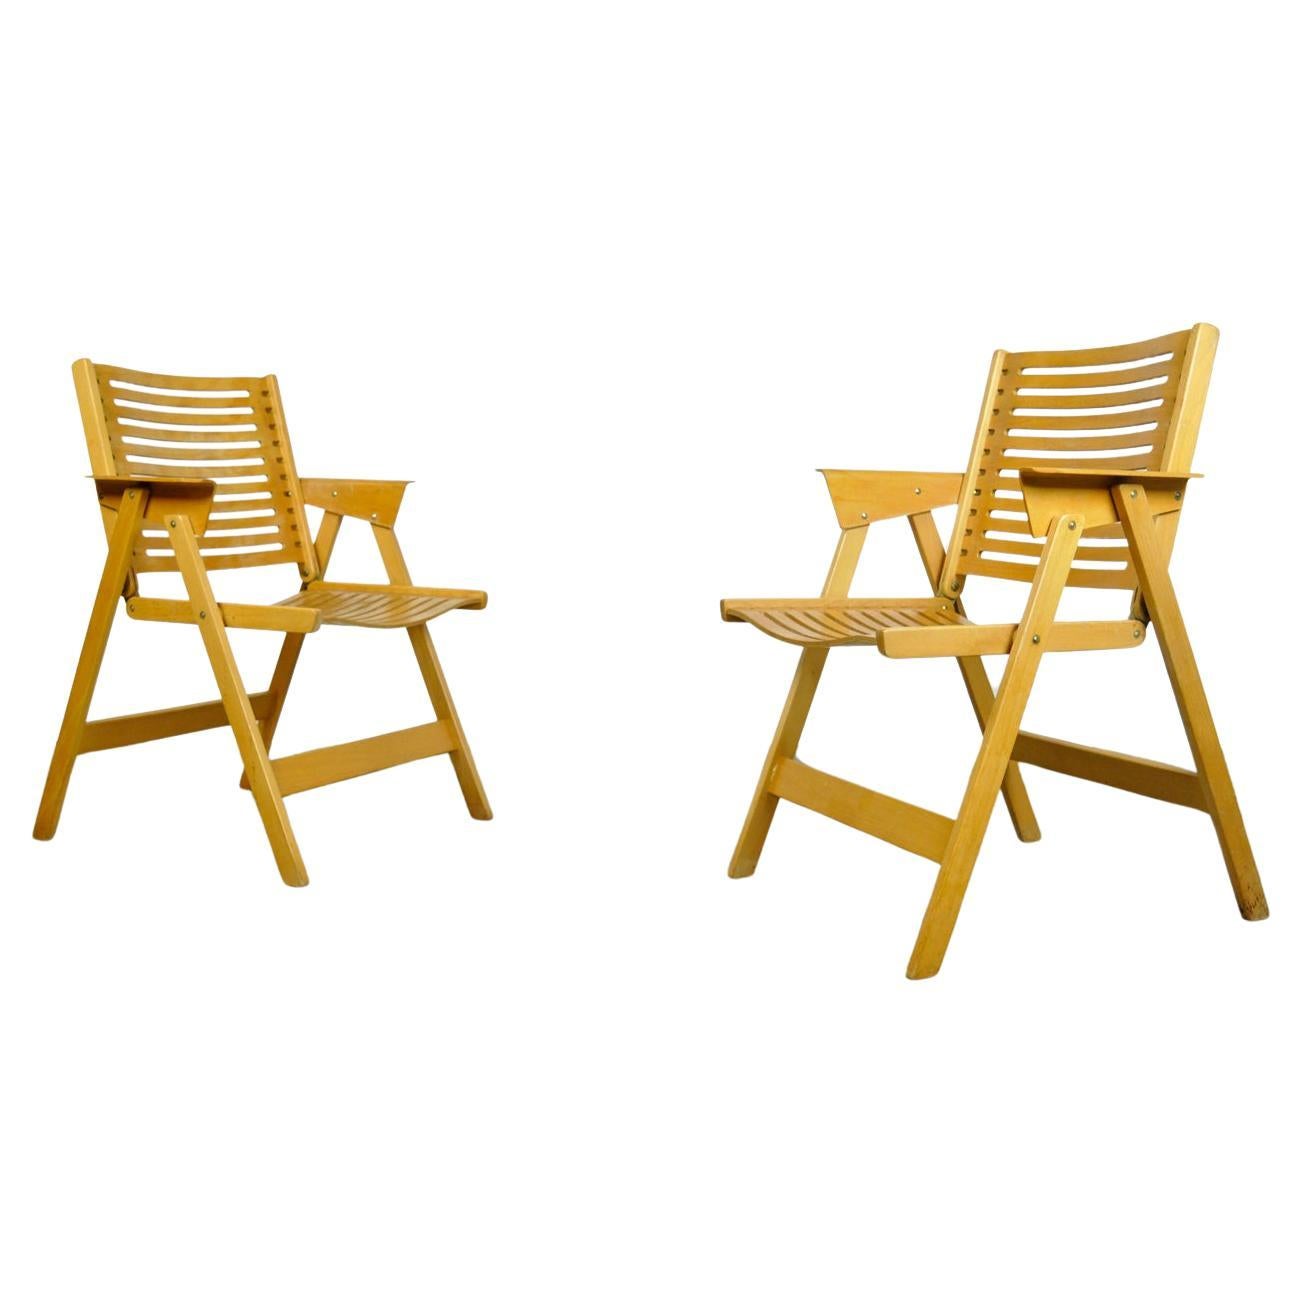 Original vintage foldable dining chairs by Niko Kralj (1920-2013) for Stol, 1950 For Sale